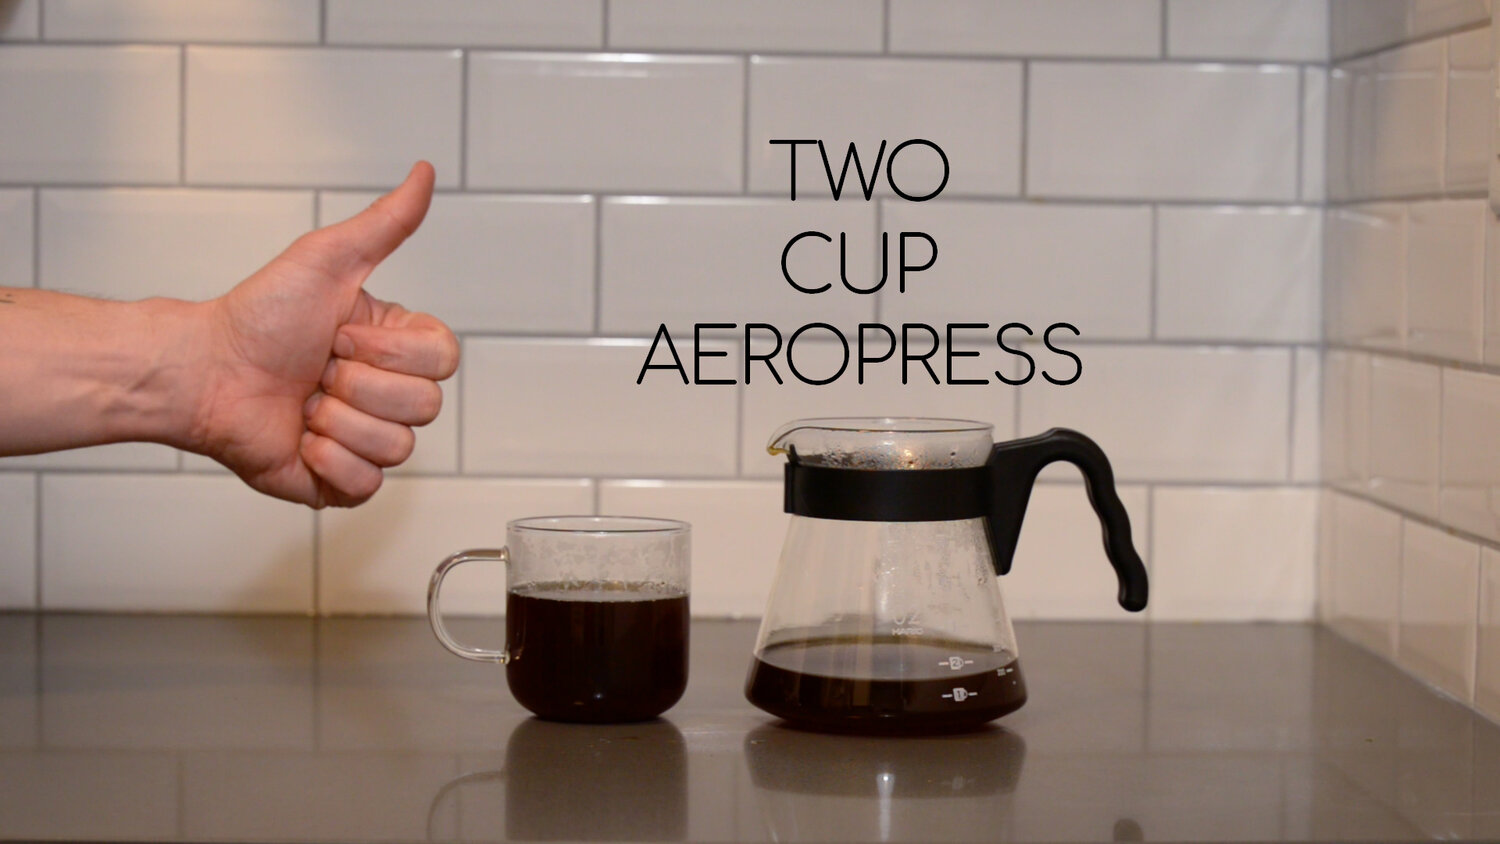 Second Cup. Aeropress good Coffee good Vibes. Two of Cups. 2 two 1 cup